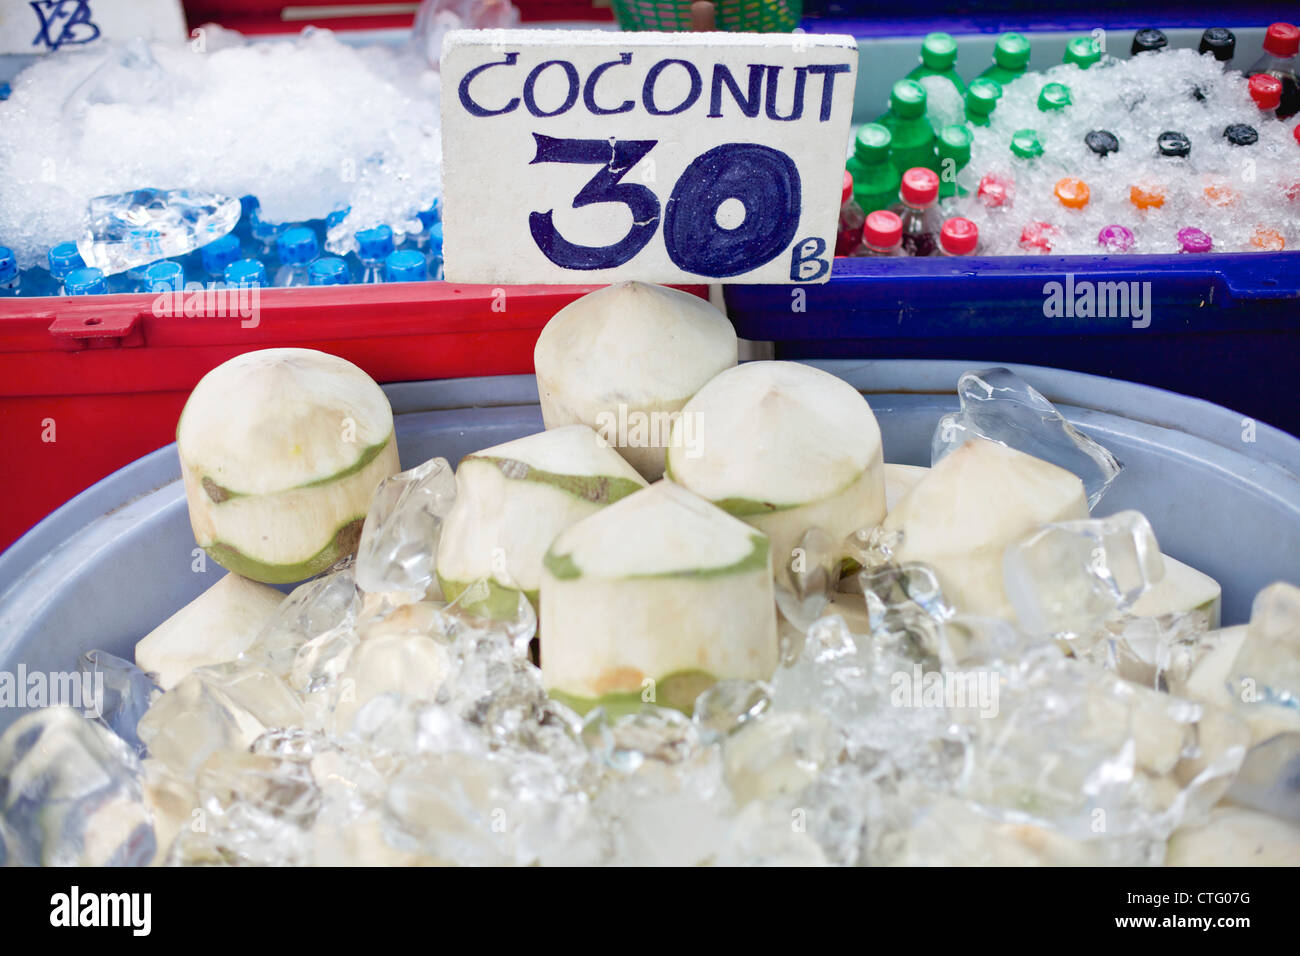 Fresh coconuts on ice in Tahiland with 30 Baht sign Stock Photo